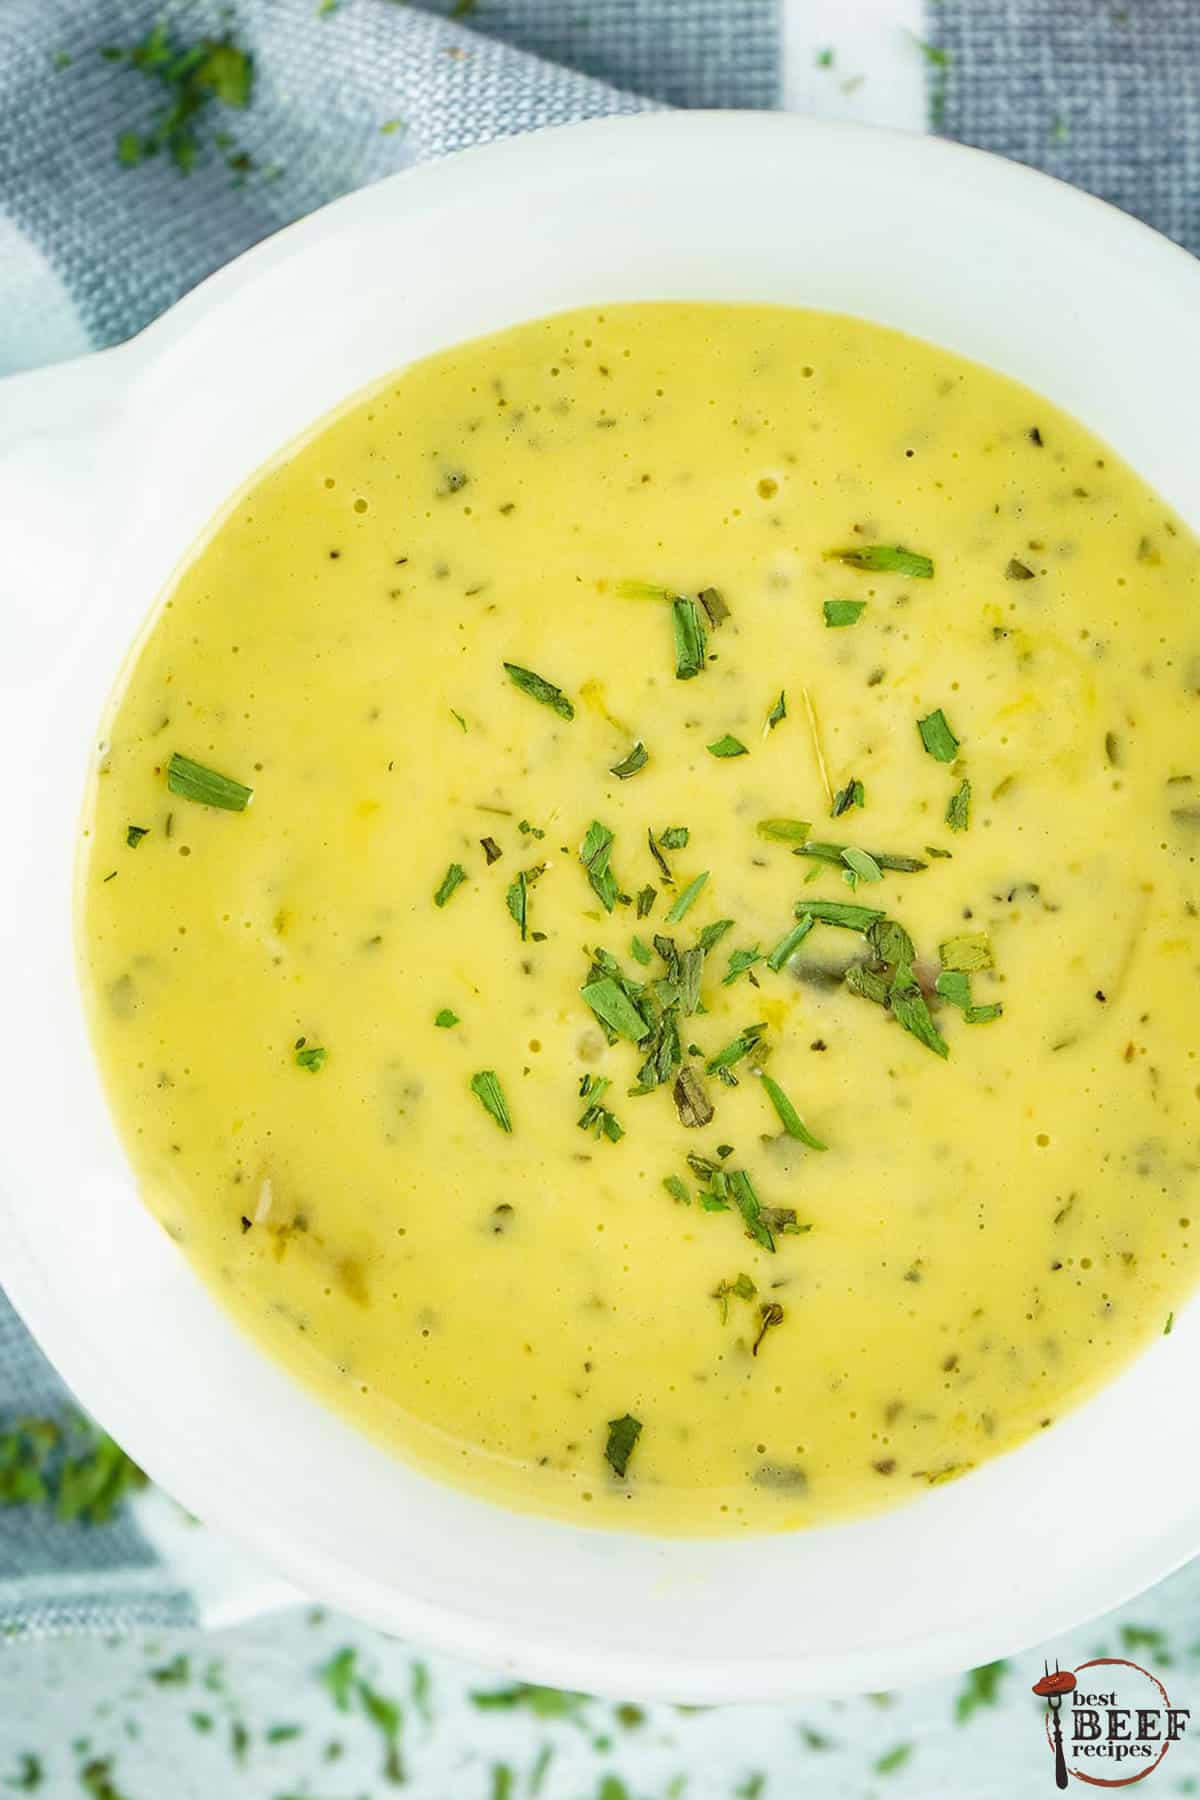 a top down view of a bowl of bearnaise sauce with sprinkled herbs